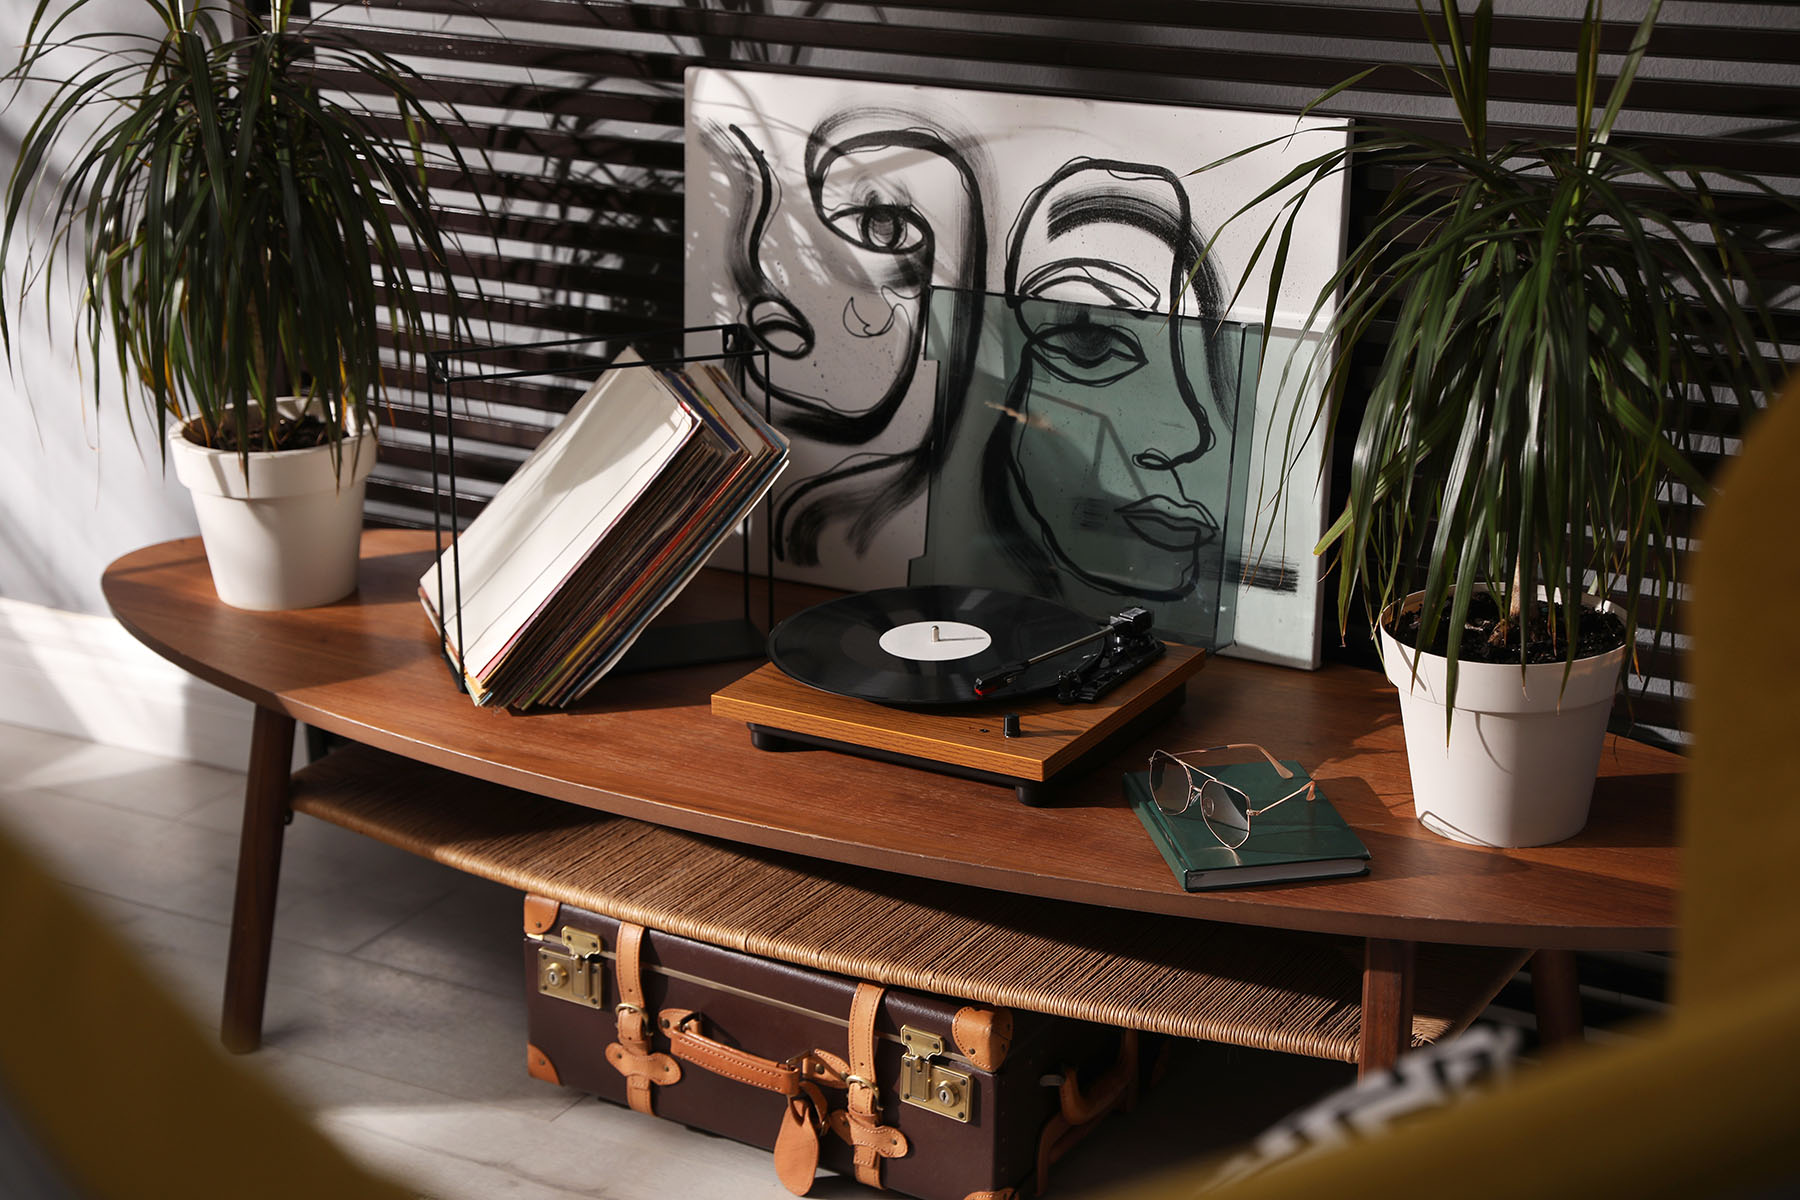 turntable placed on the table in the room